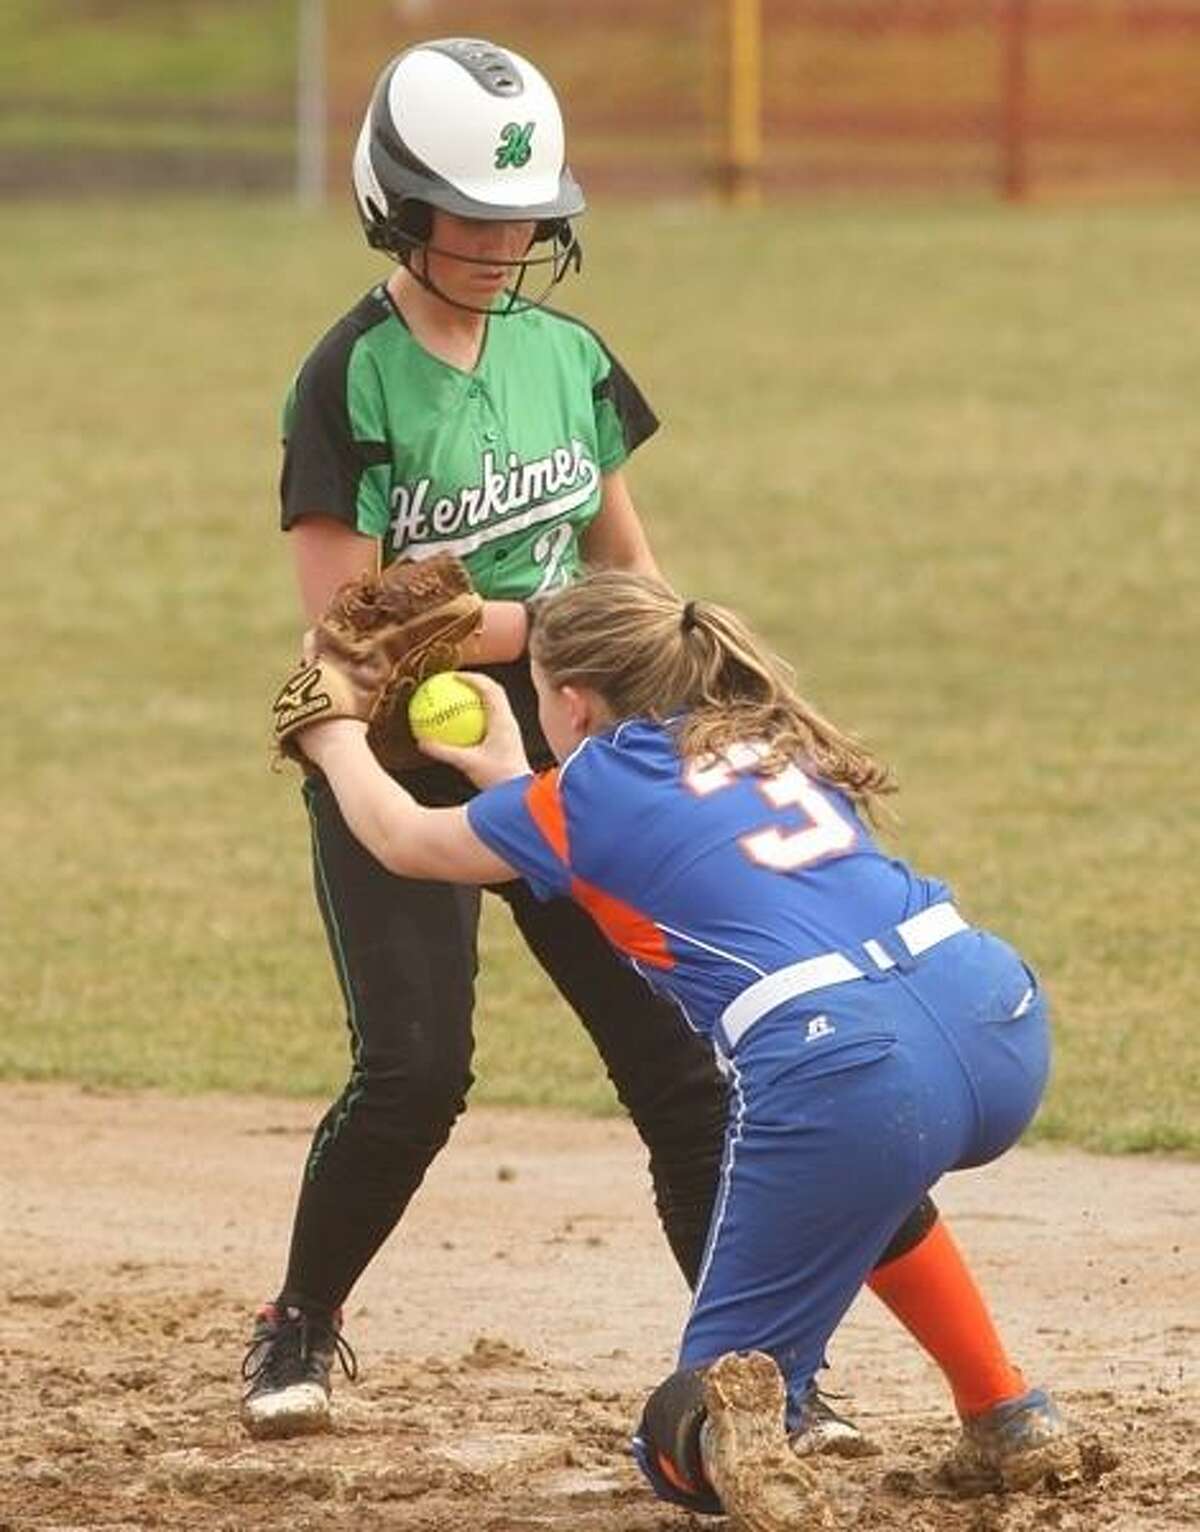 PHOTO BY JOHN HAEGER @ ONEIDAPHOTO ON TWITTER/ONEIDA DAILY DISPATCH Herkimer's Shellbi Morris (2) gets safely back to second before Oneida's Lexi Skibitski (3) can make the tag during their game on Wednesday, April 10, 2013 in Herkimer.